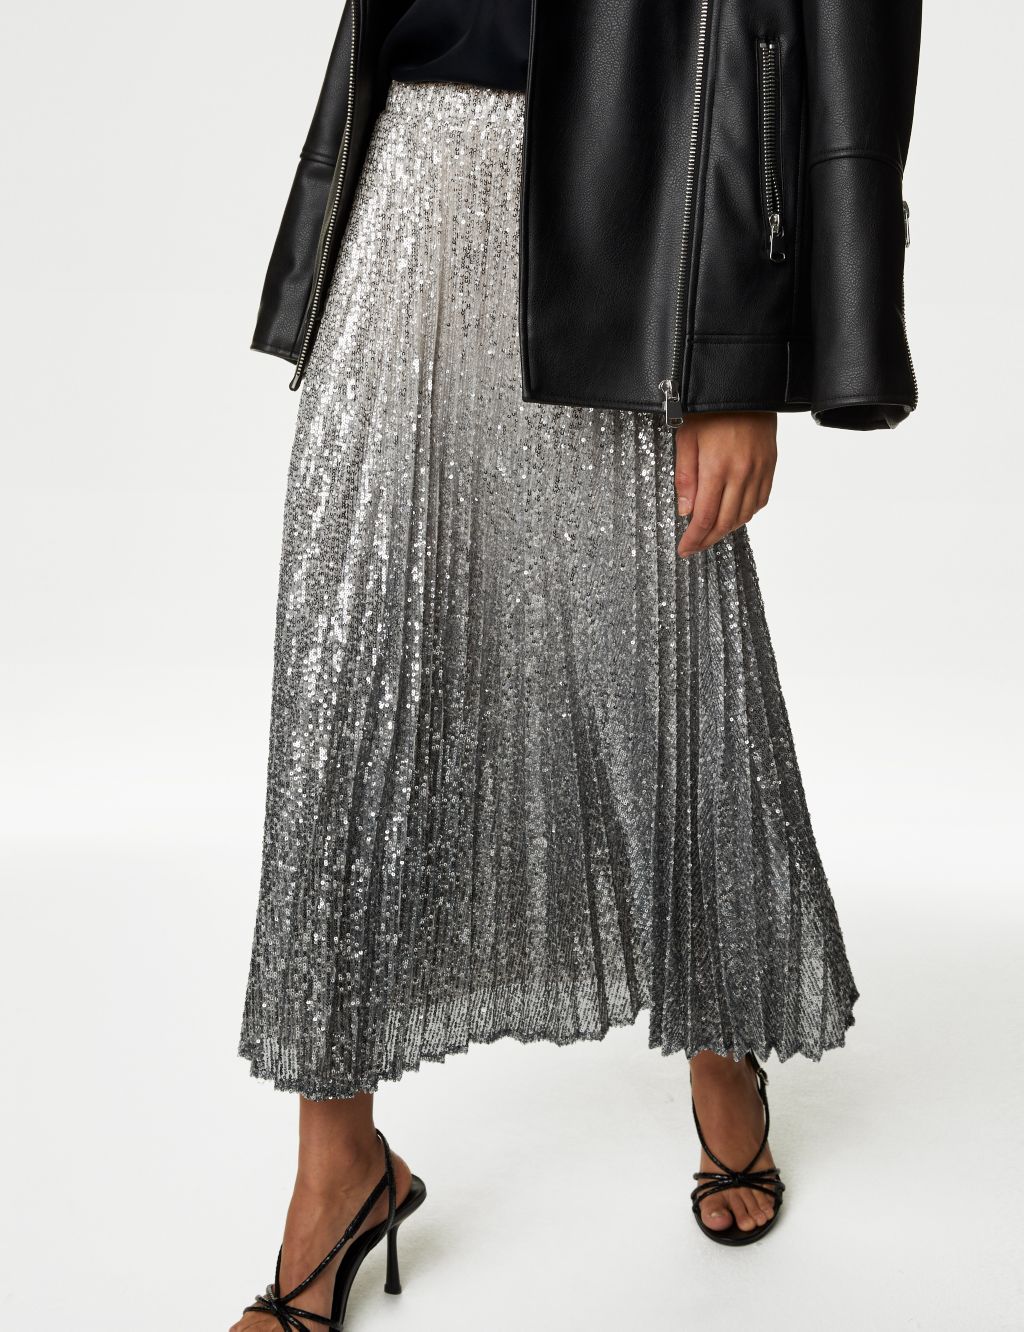 Sequin Ombre Pleated Midaxi Skirt image 3